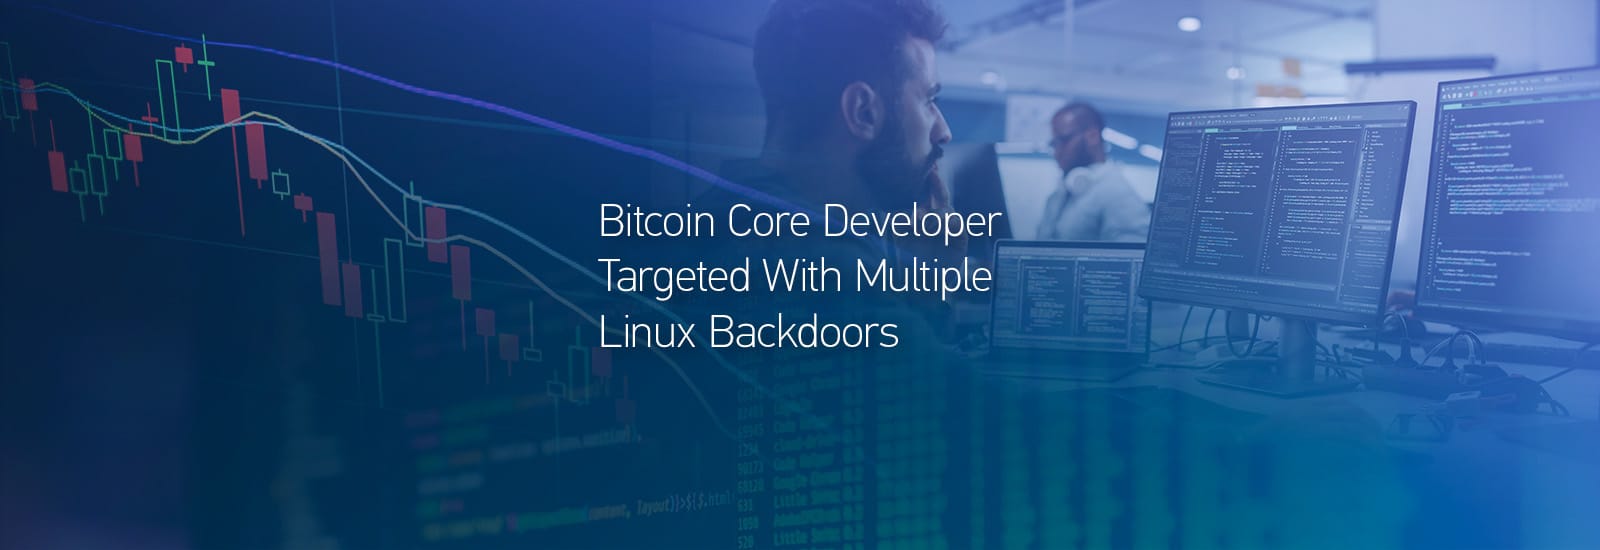 Bitcoin Core Developer Targeted With Multiple Linux Backdoors